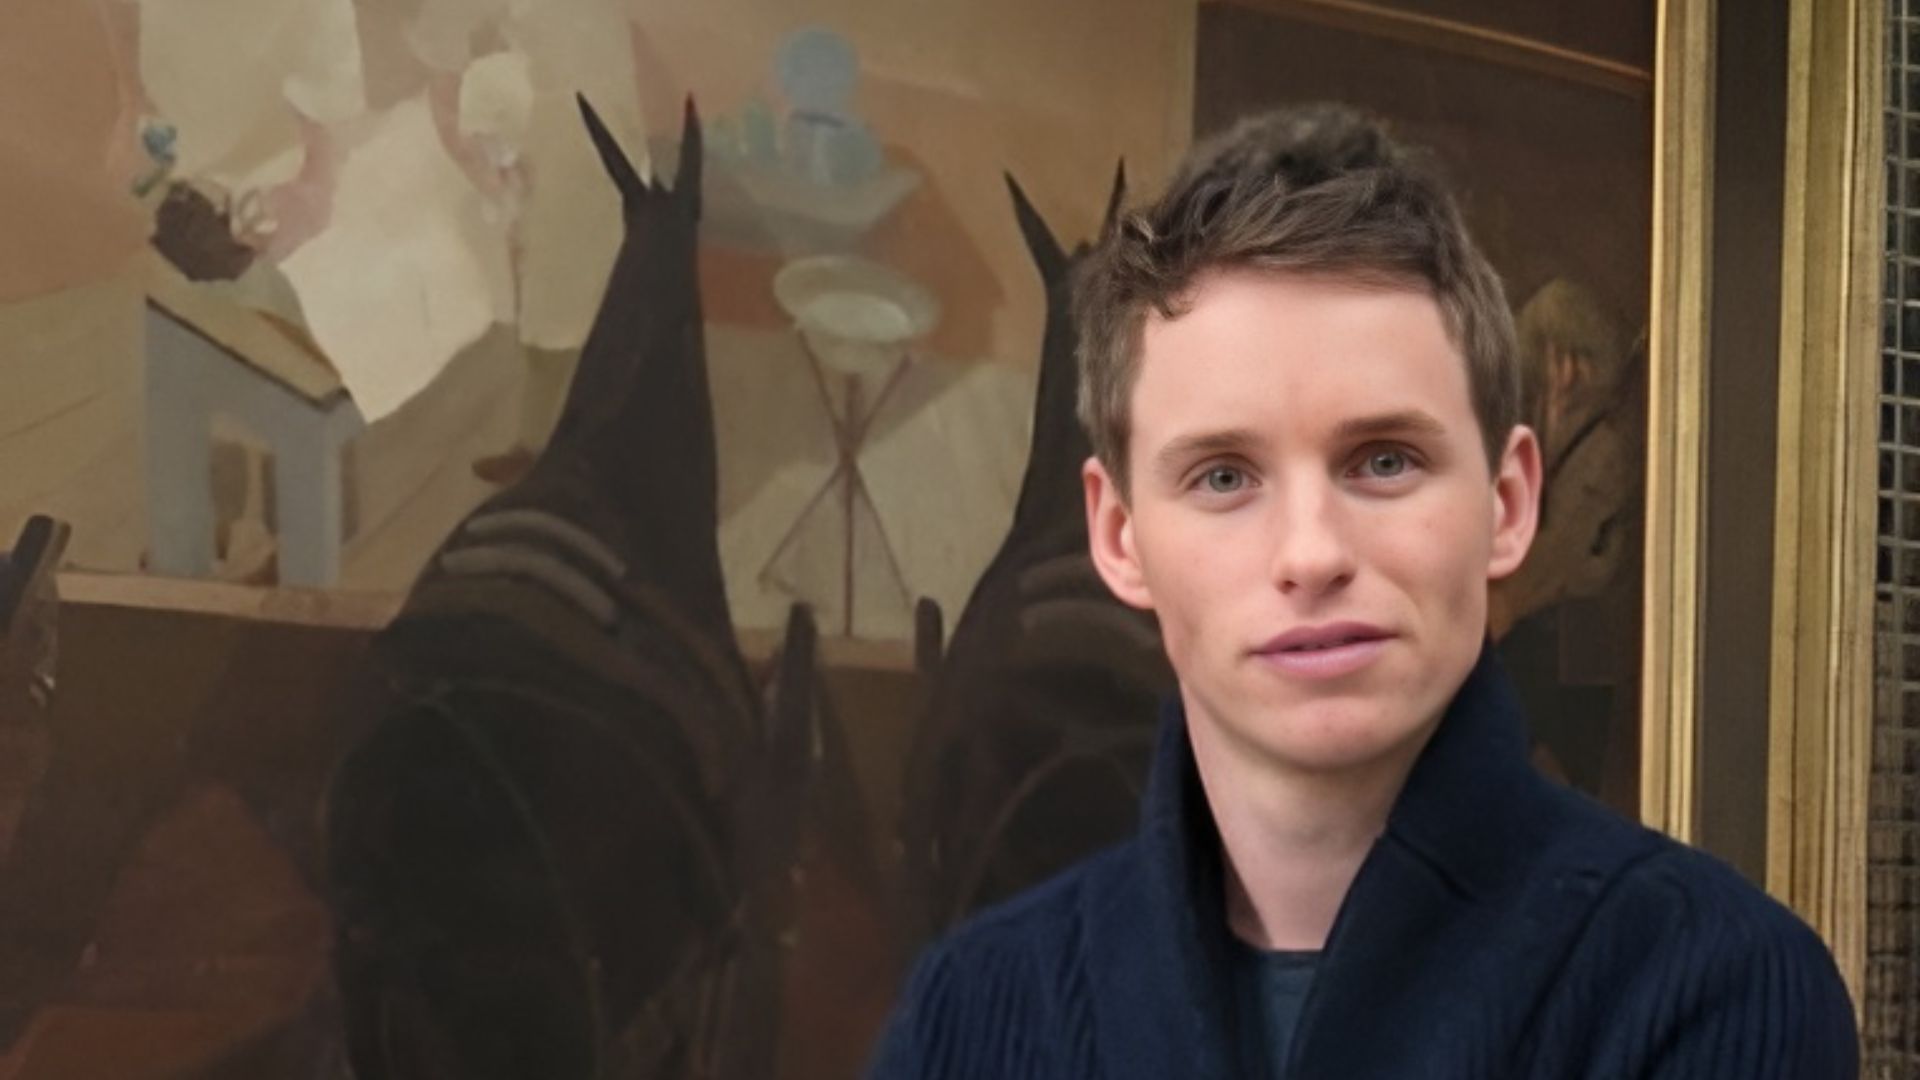 Eddie Redmayne stands in front of a painting depicting the horrors of WWI